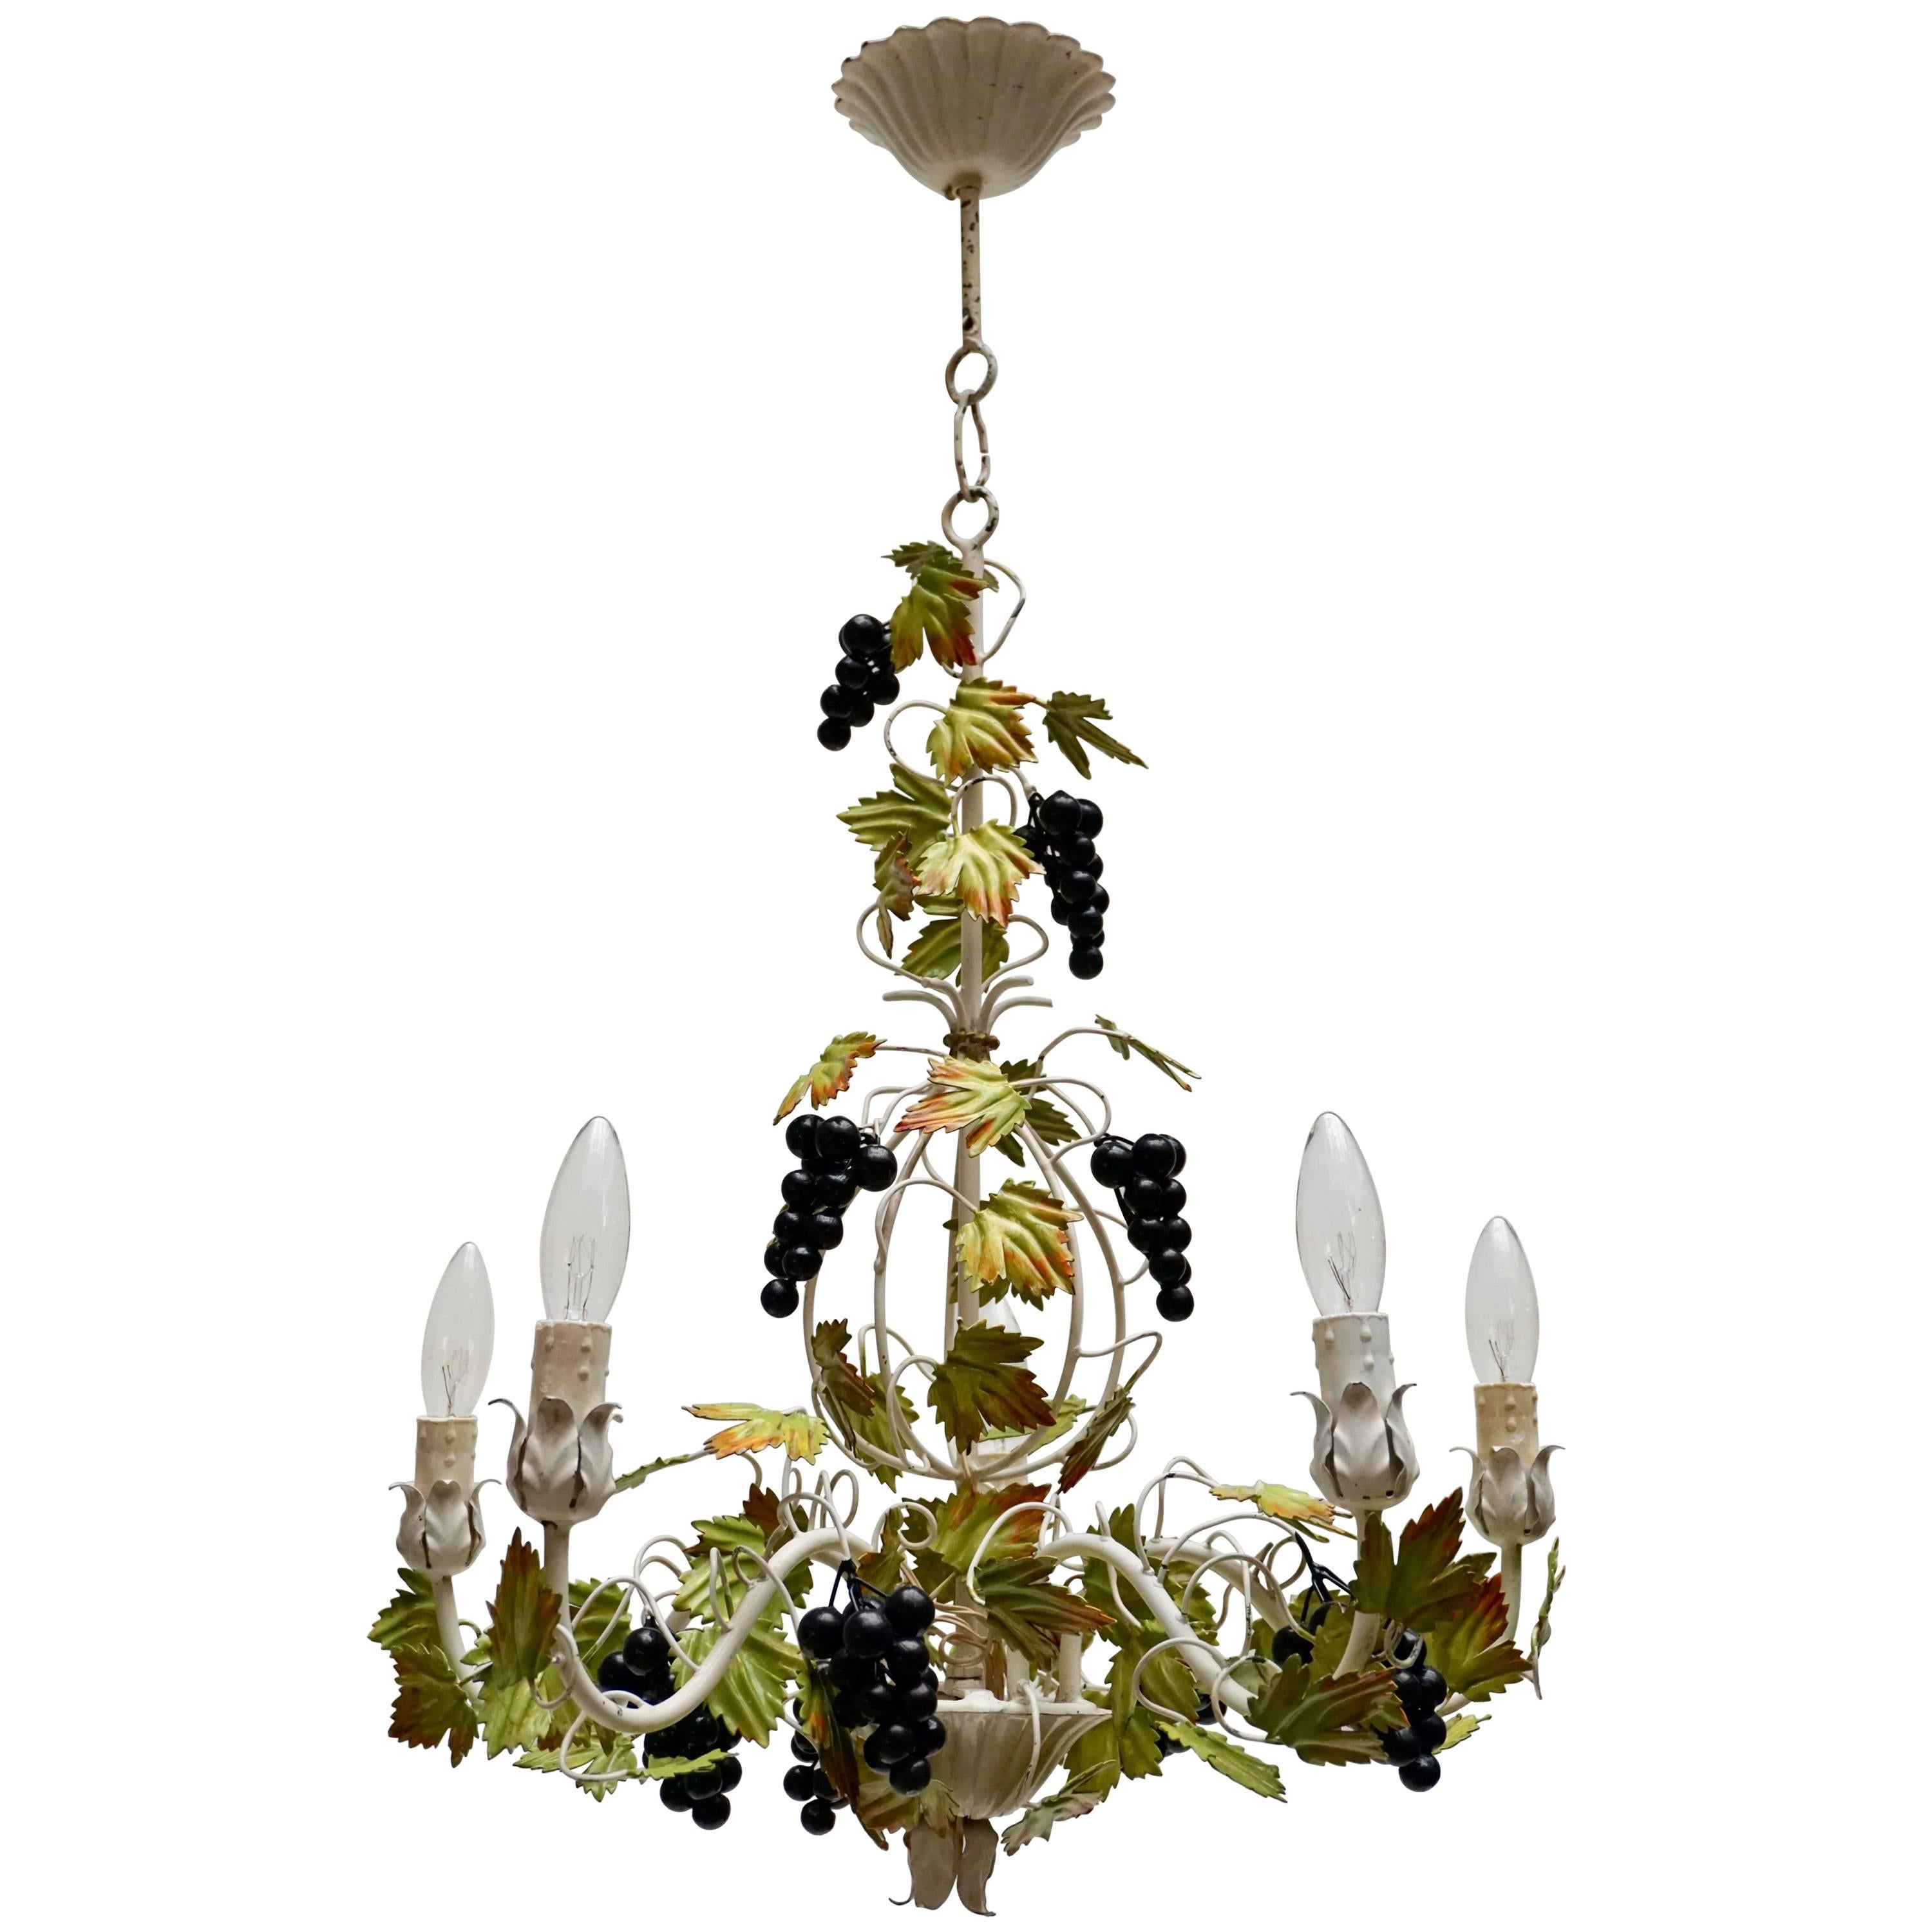 Metal Painted Chandelier with Bunches of Grapes For Sale